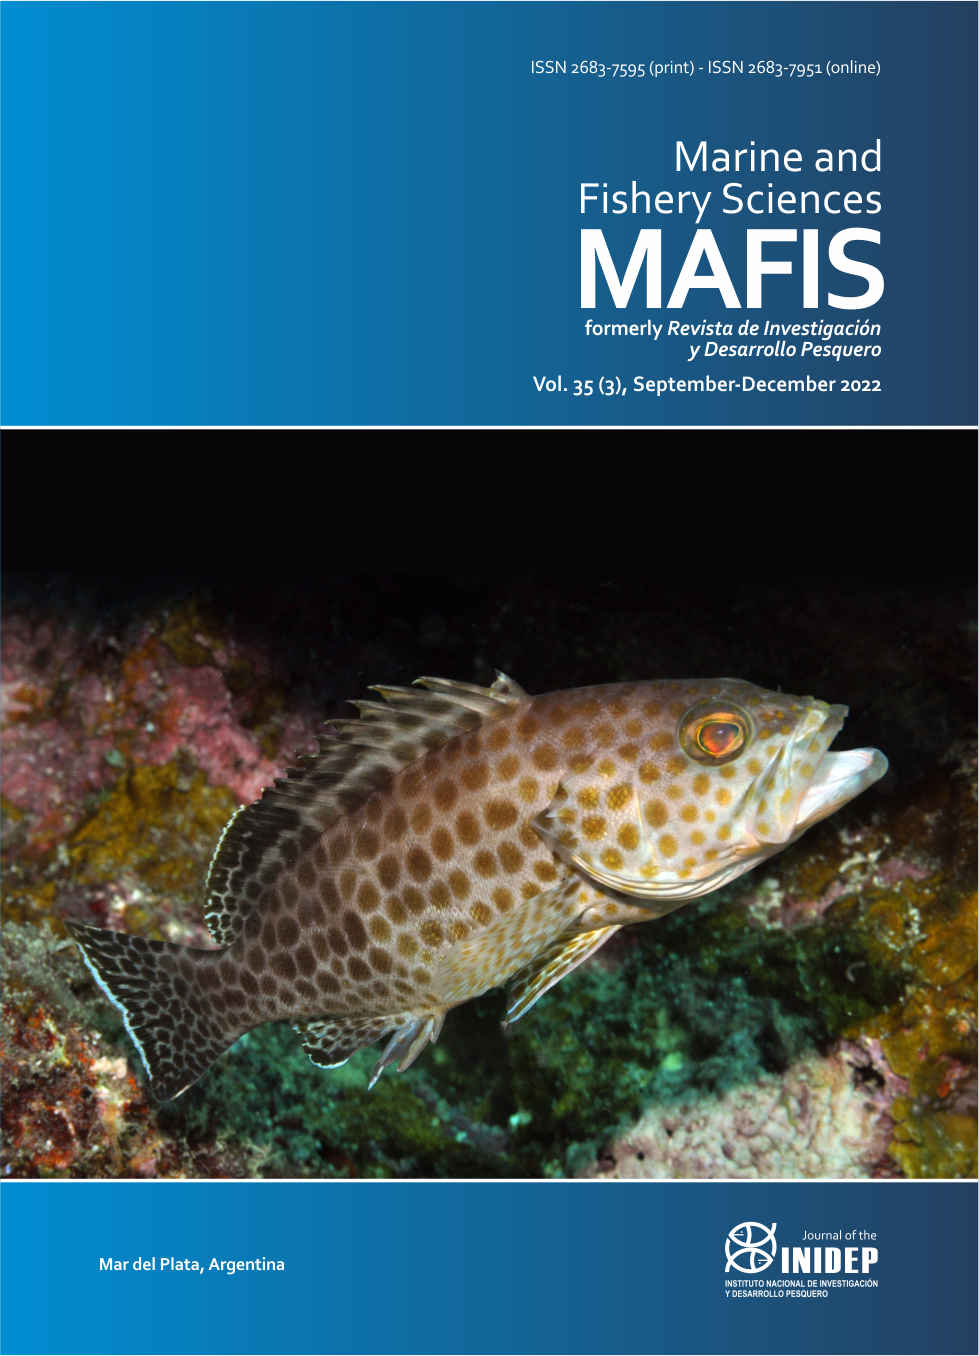 					View Vol. 35 No. 3 (2022): Marine and Fishery Sciences (MAFIS)
				